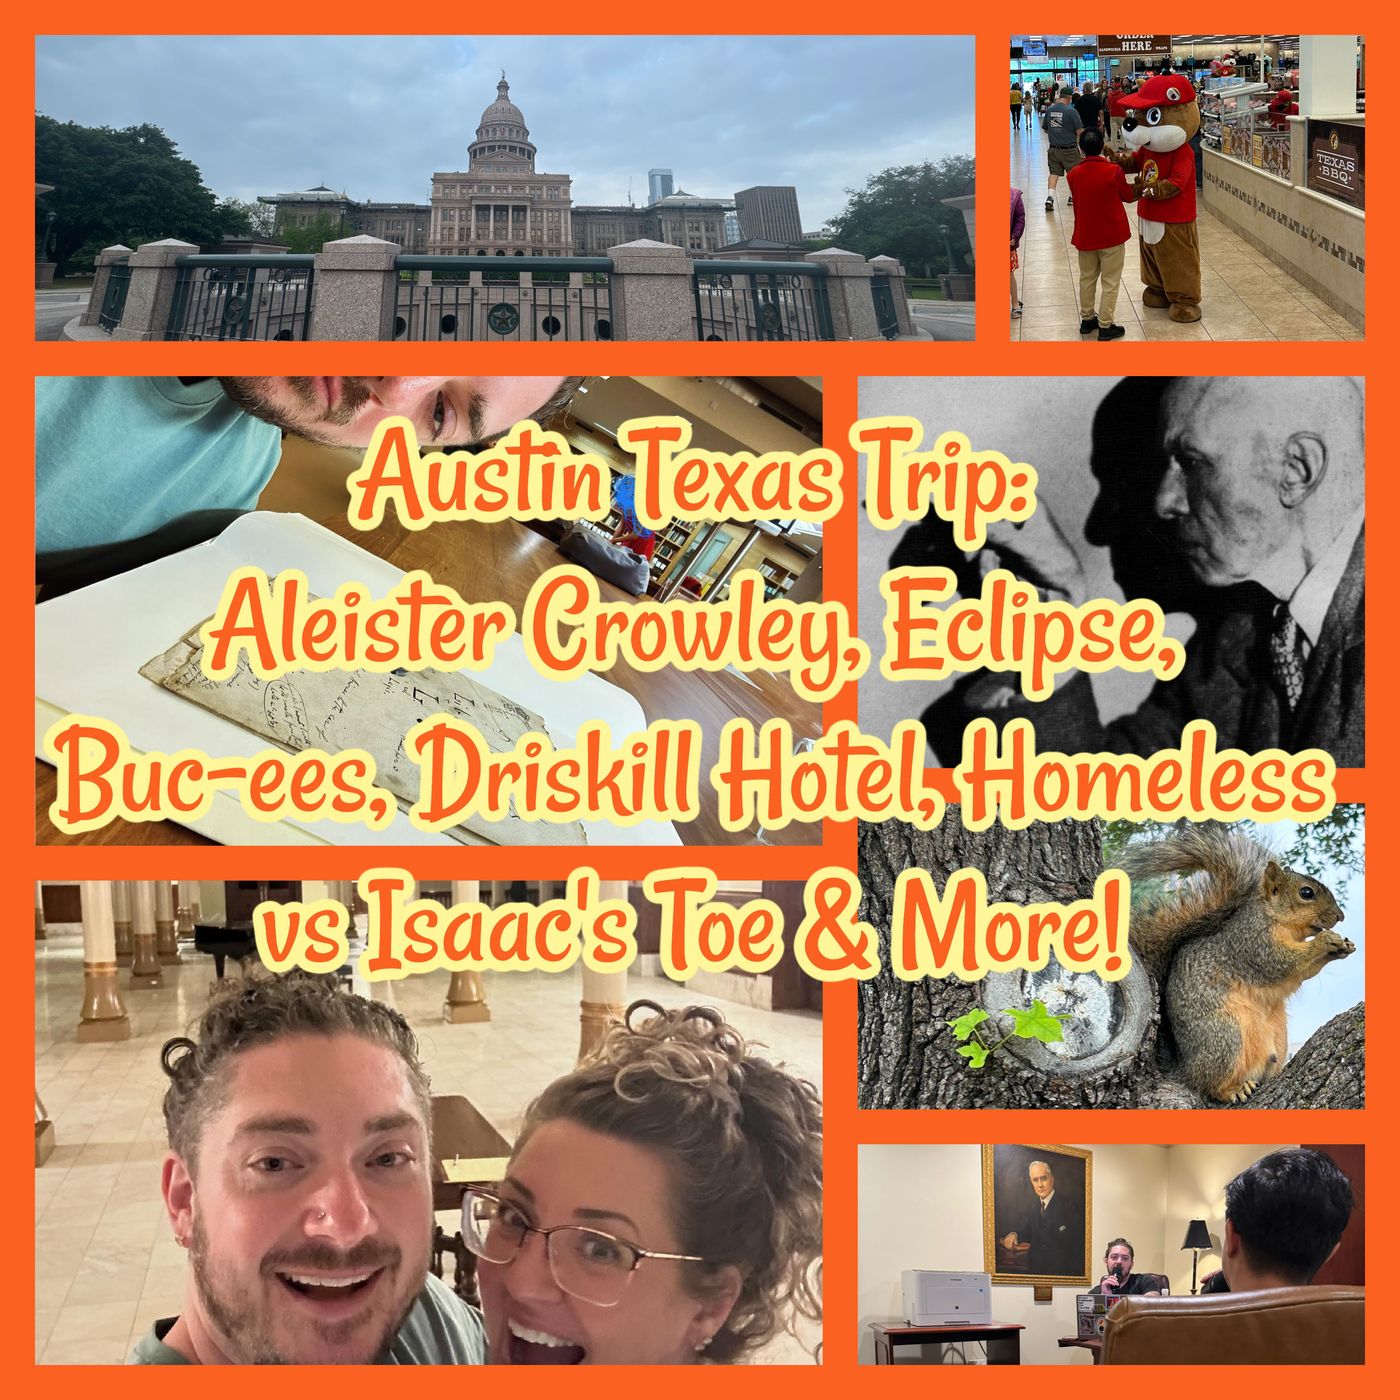 Austin Texas Trip: Aleister Crowley, Eclipse, Buc-ees, Driskill Hotel, Homeless vs Isaac’s Toe & More!